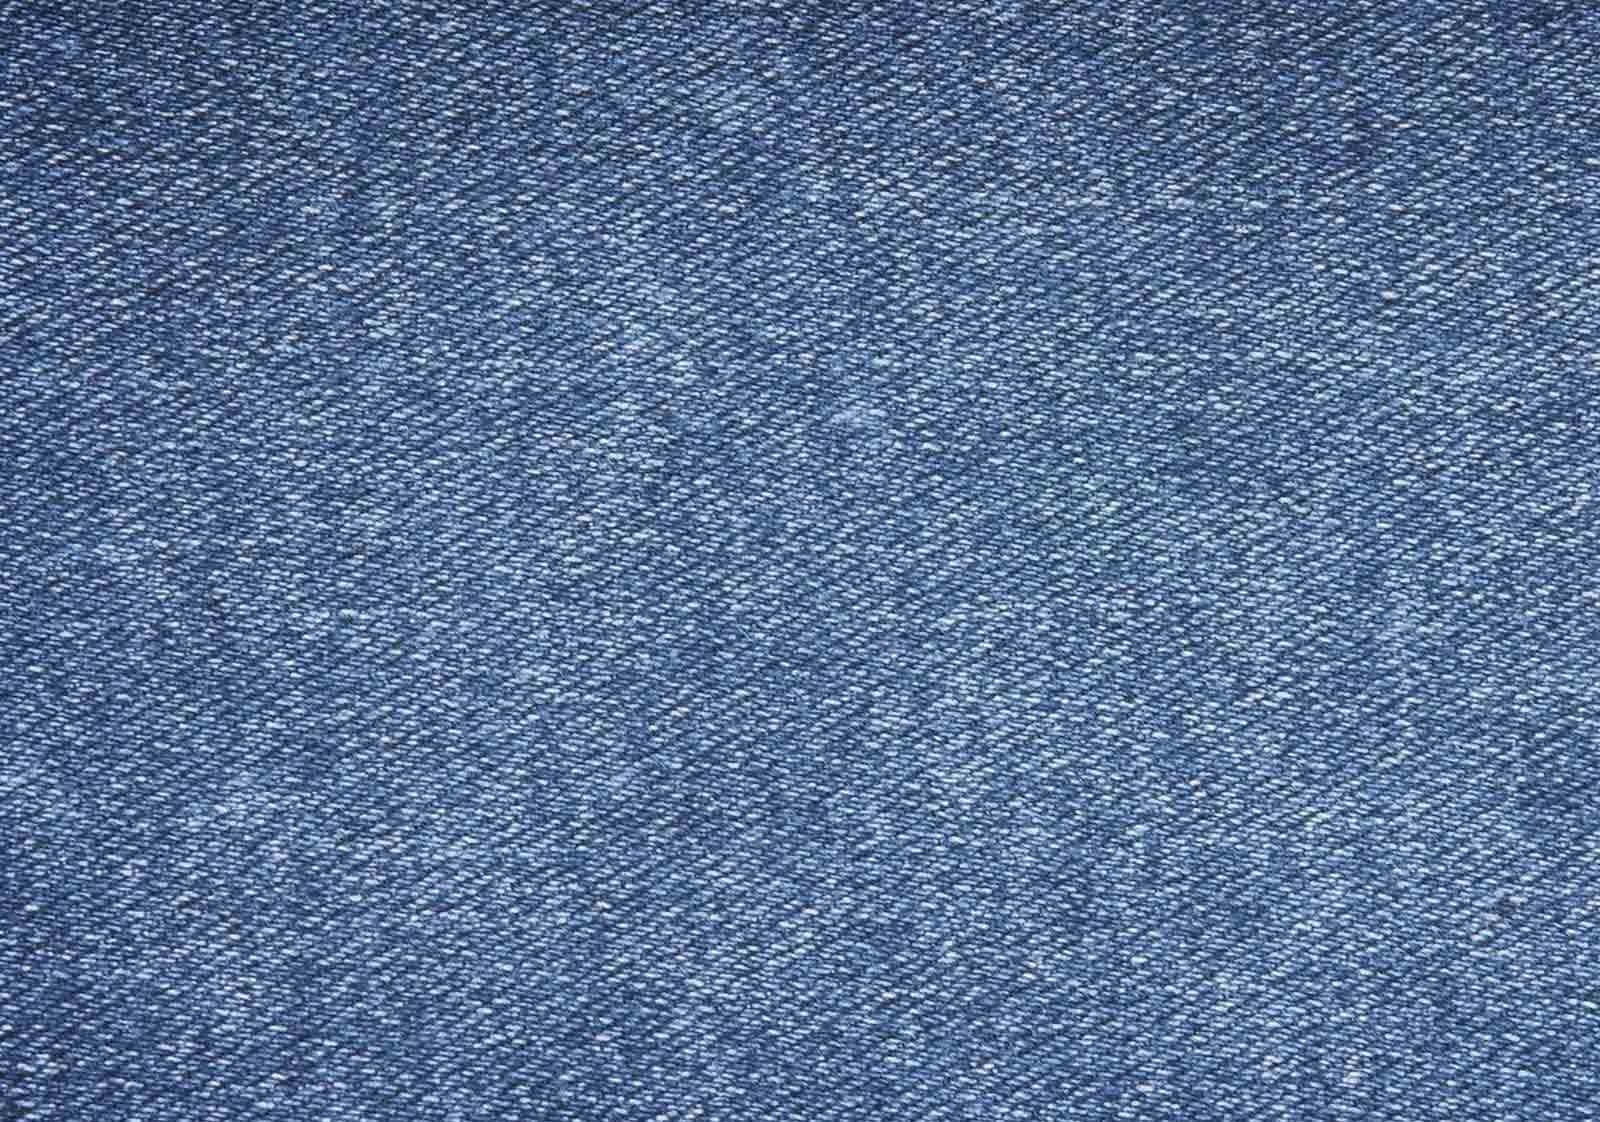 A stylish, deep blue pair of real denim jeans. Wallpaper